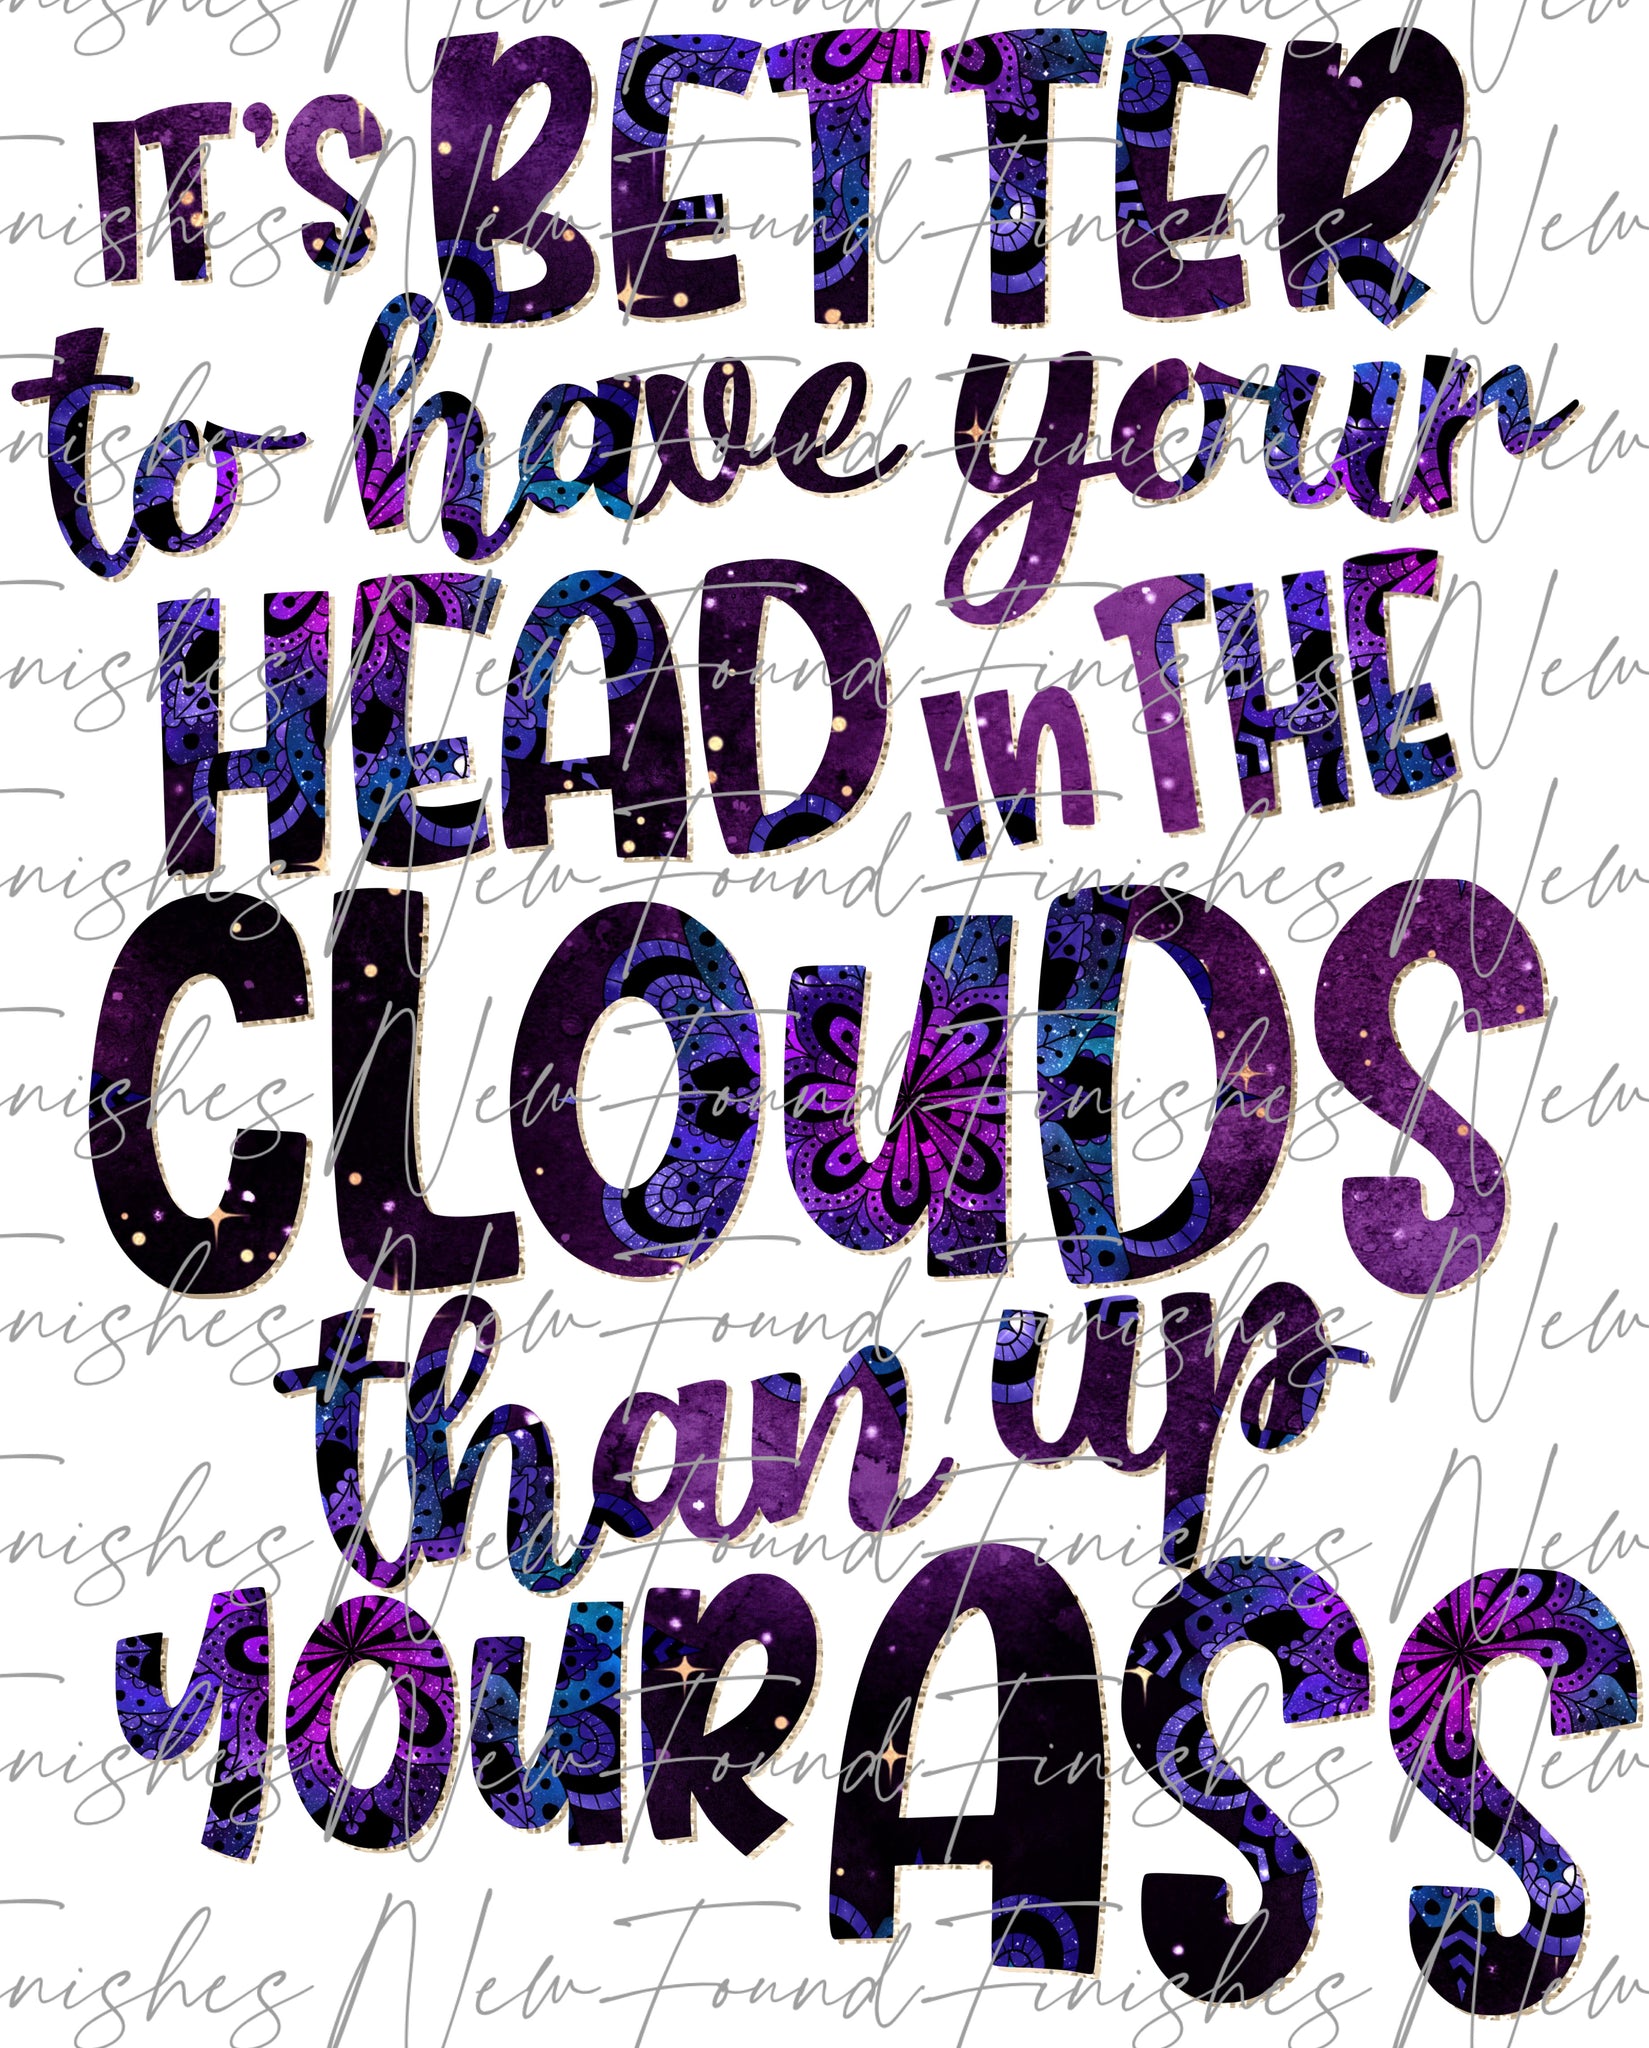 Better to have your head in the clouds